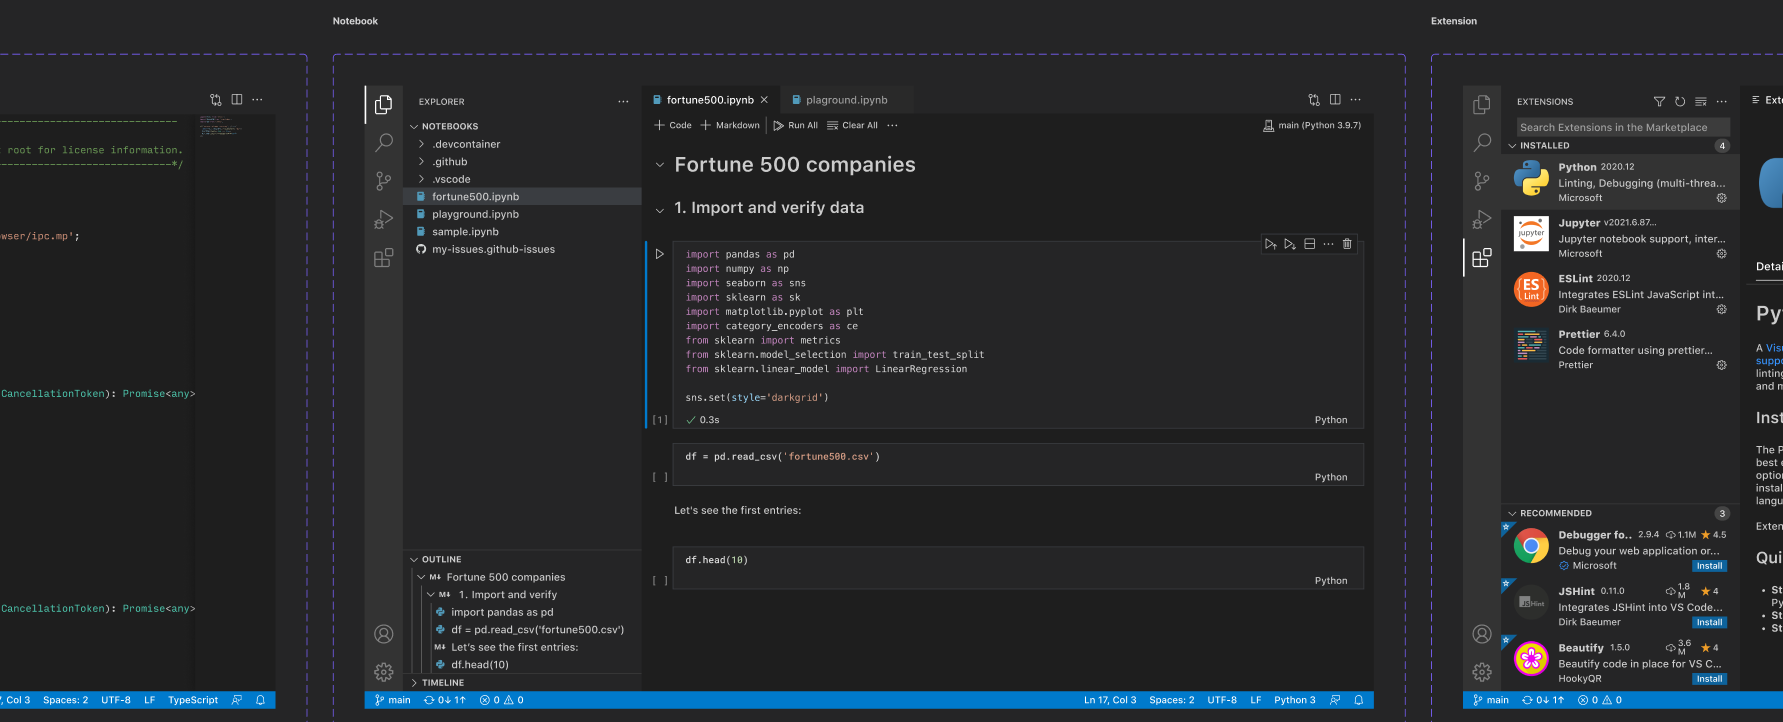 Fig. 8. Microsoft team is also sharing a guide for Visual Studio Code in the Figma community and on Github to create addons